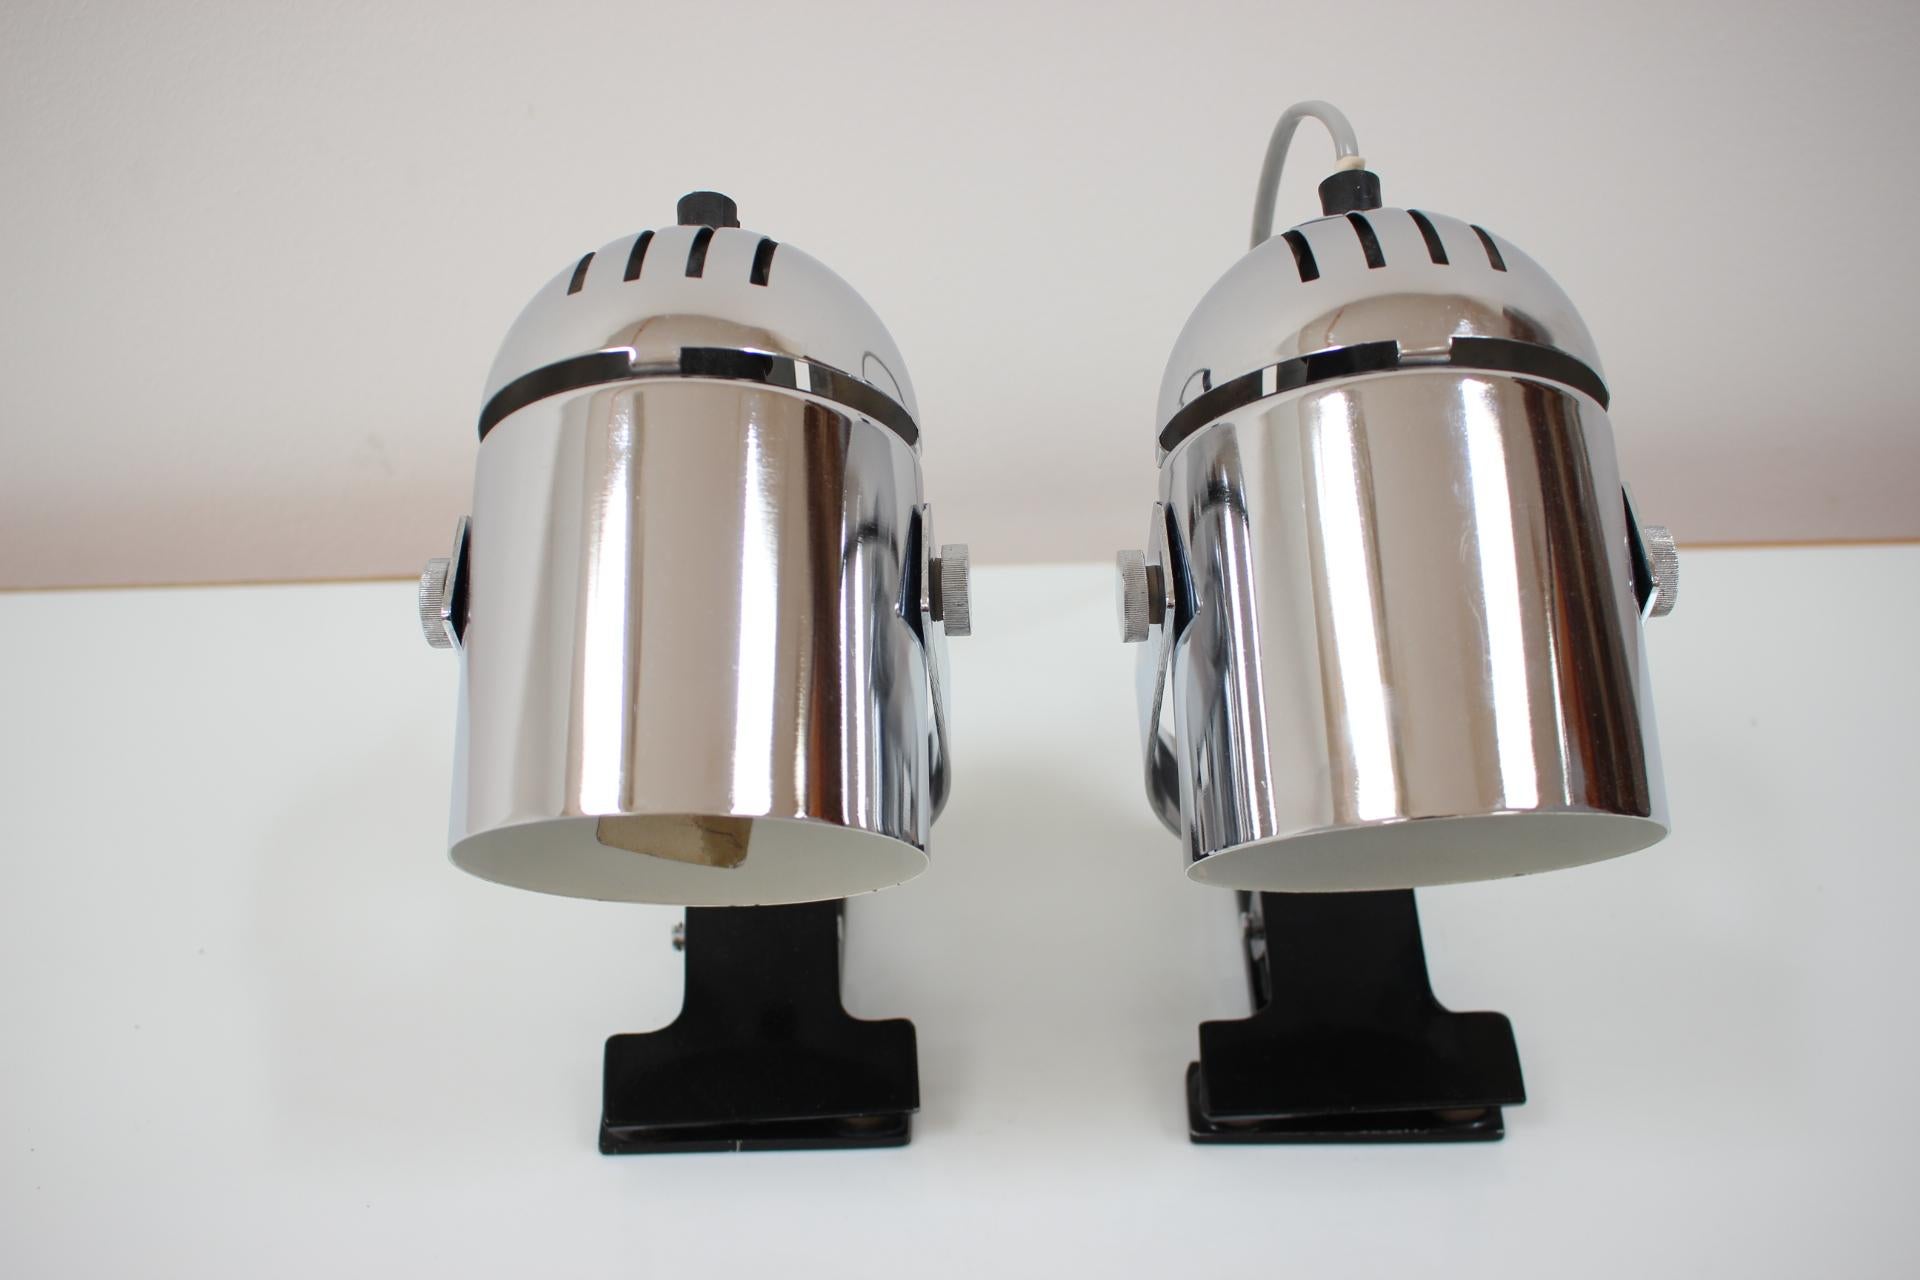 Czech Mid-Century Table Lamps Designed by Stanislav Indra, 1970's For Sale